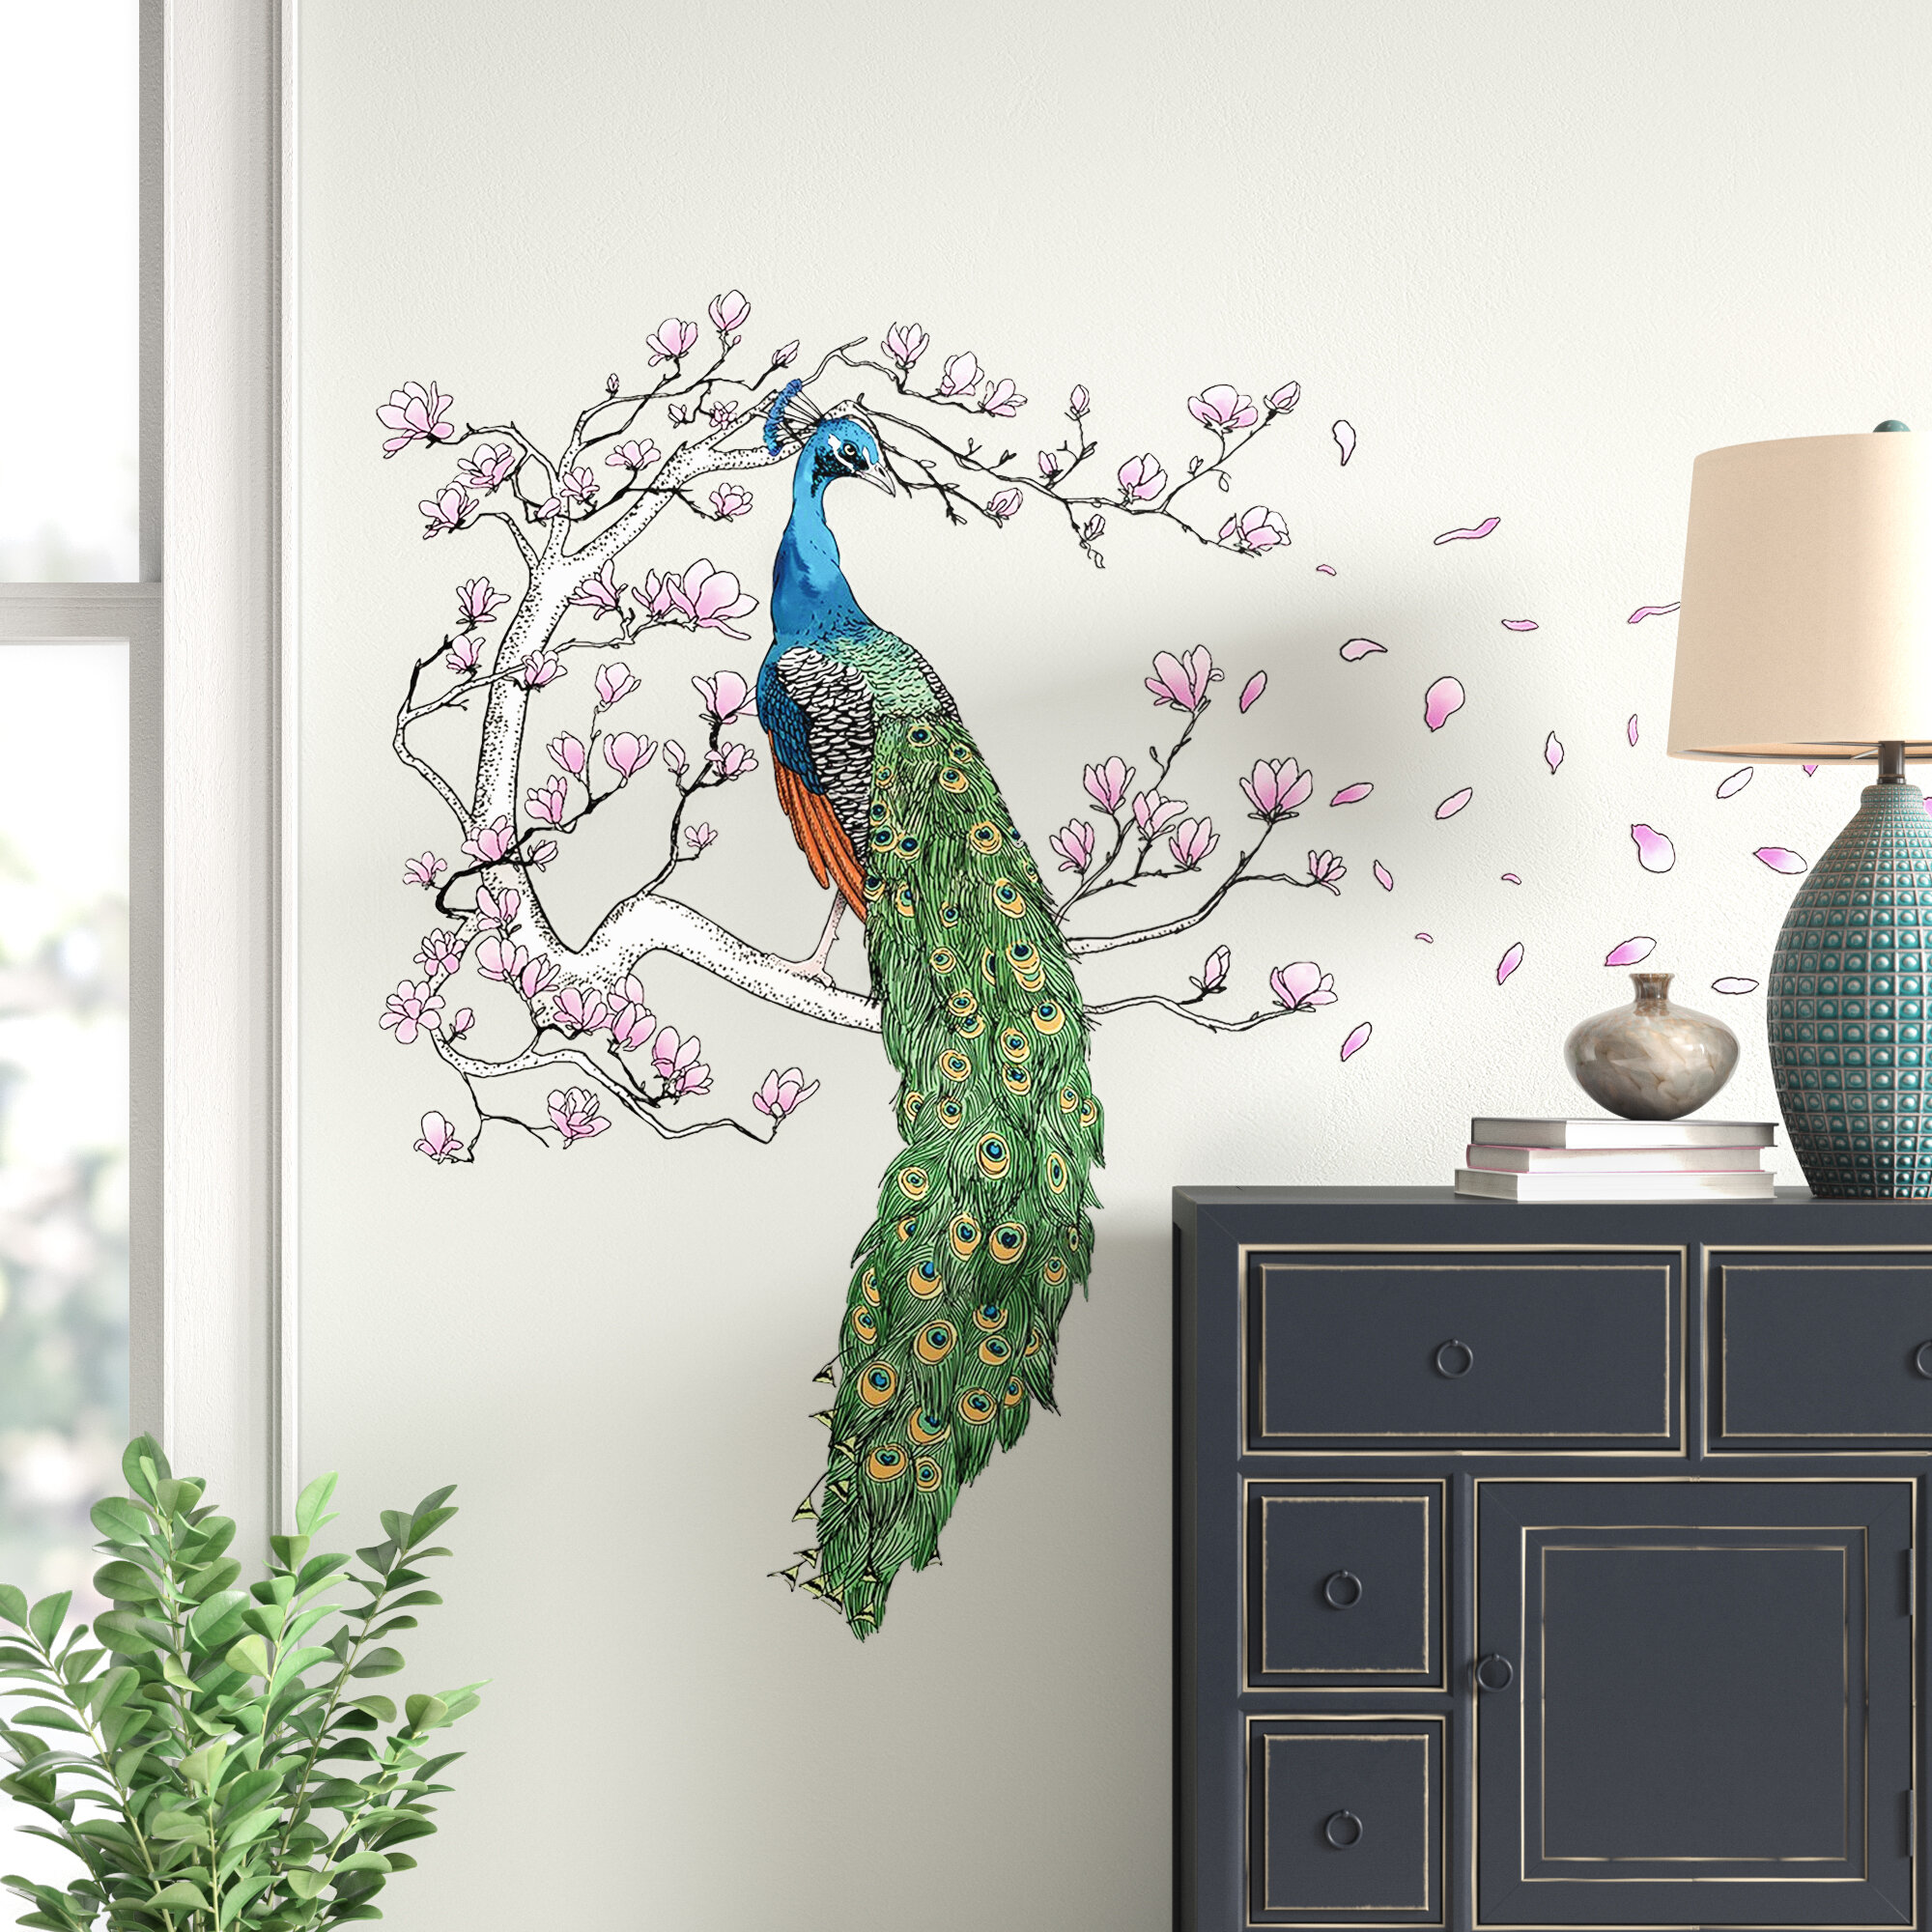 PEACOCK Wall Decal Sticker Mural Fork Art Leaves Tree Branch Made in Canada 